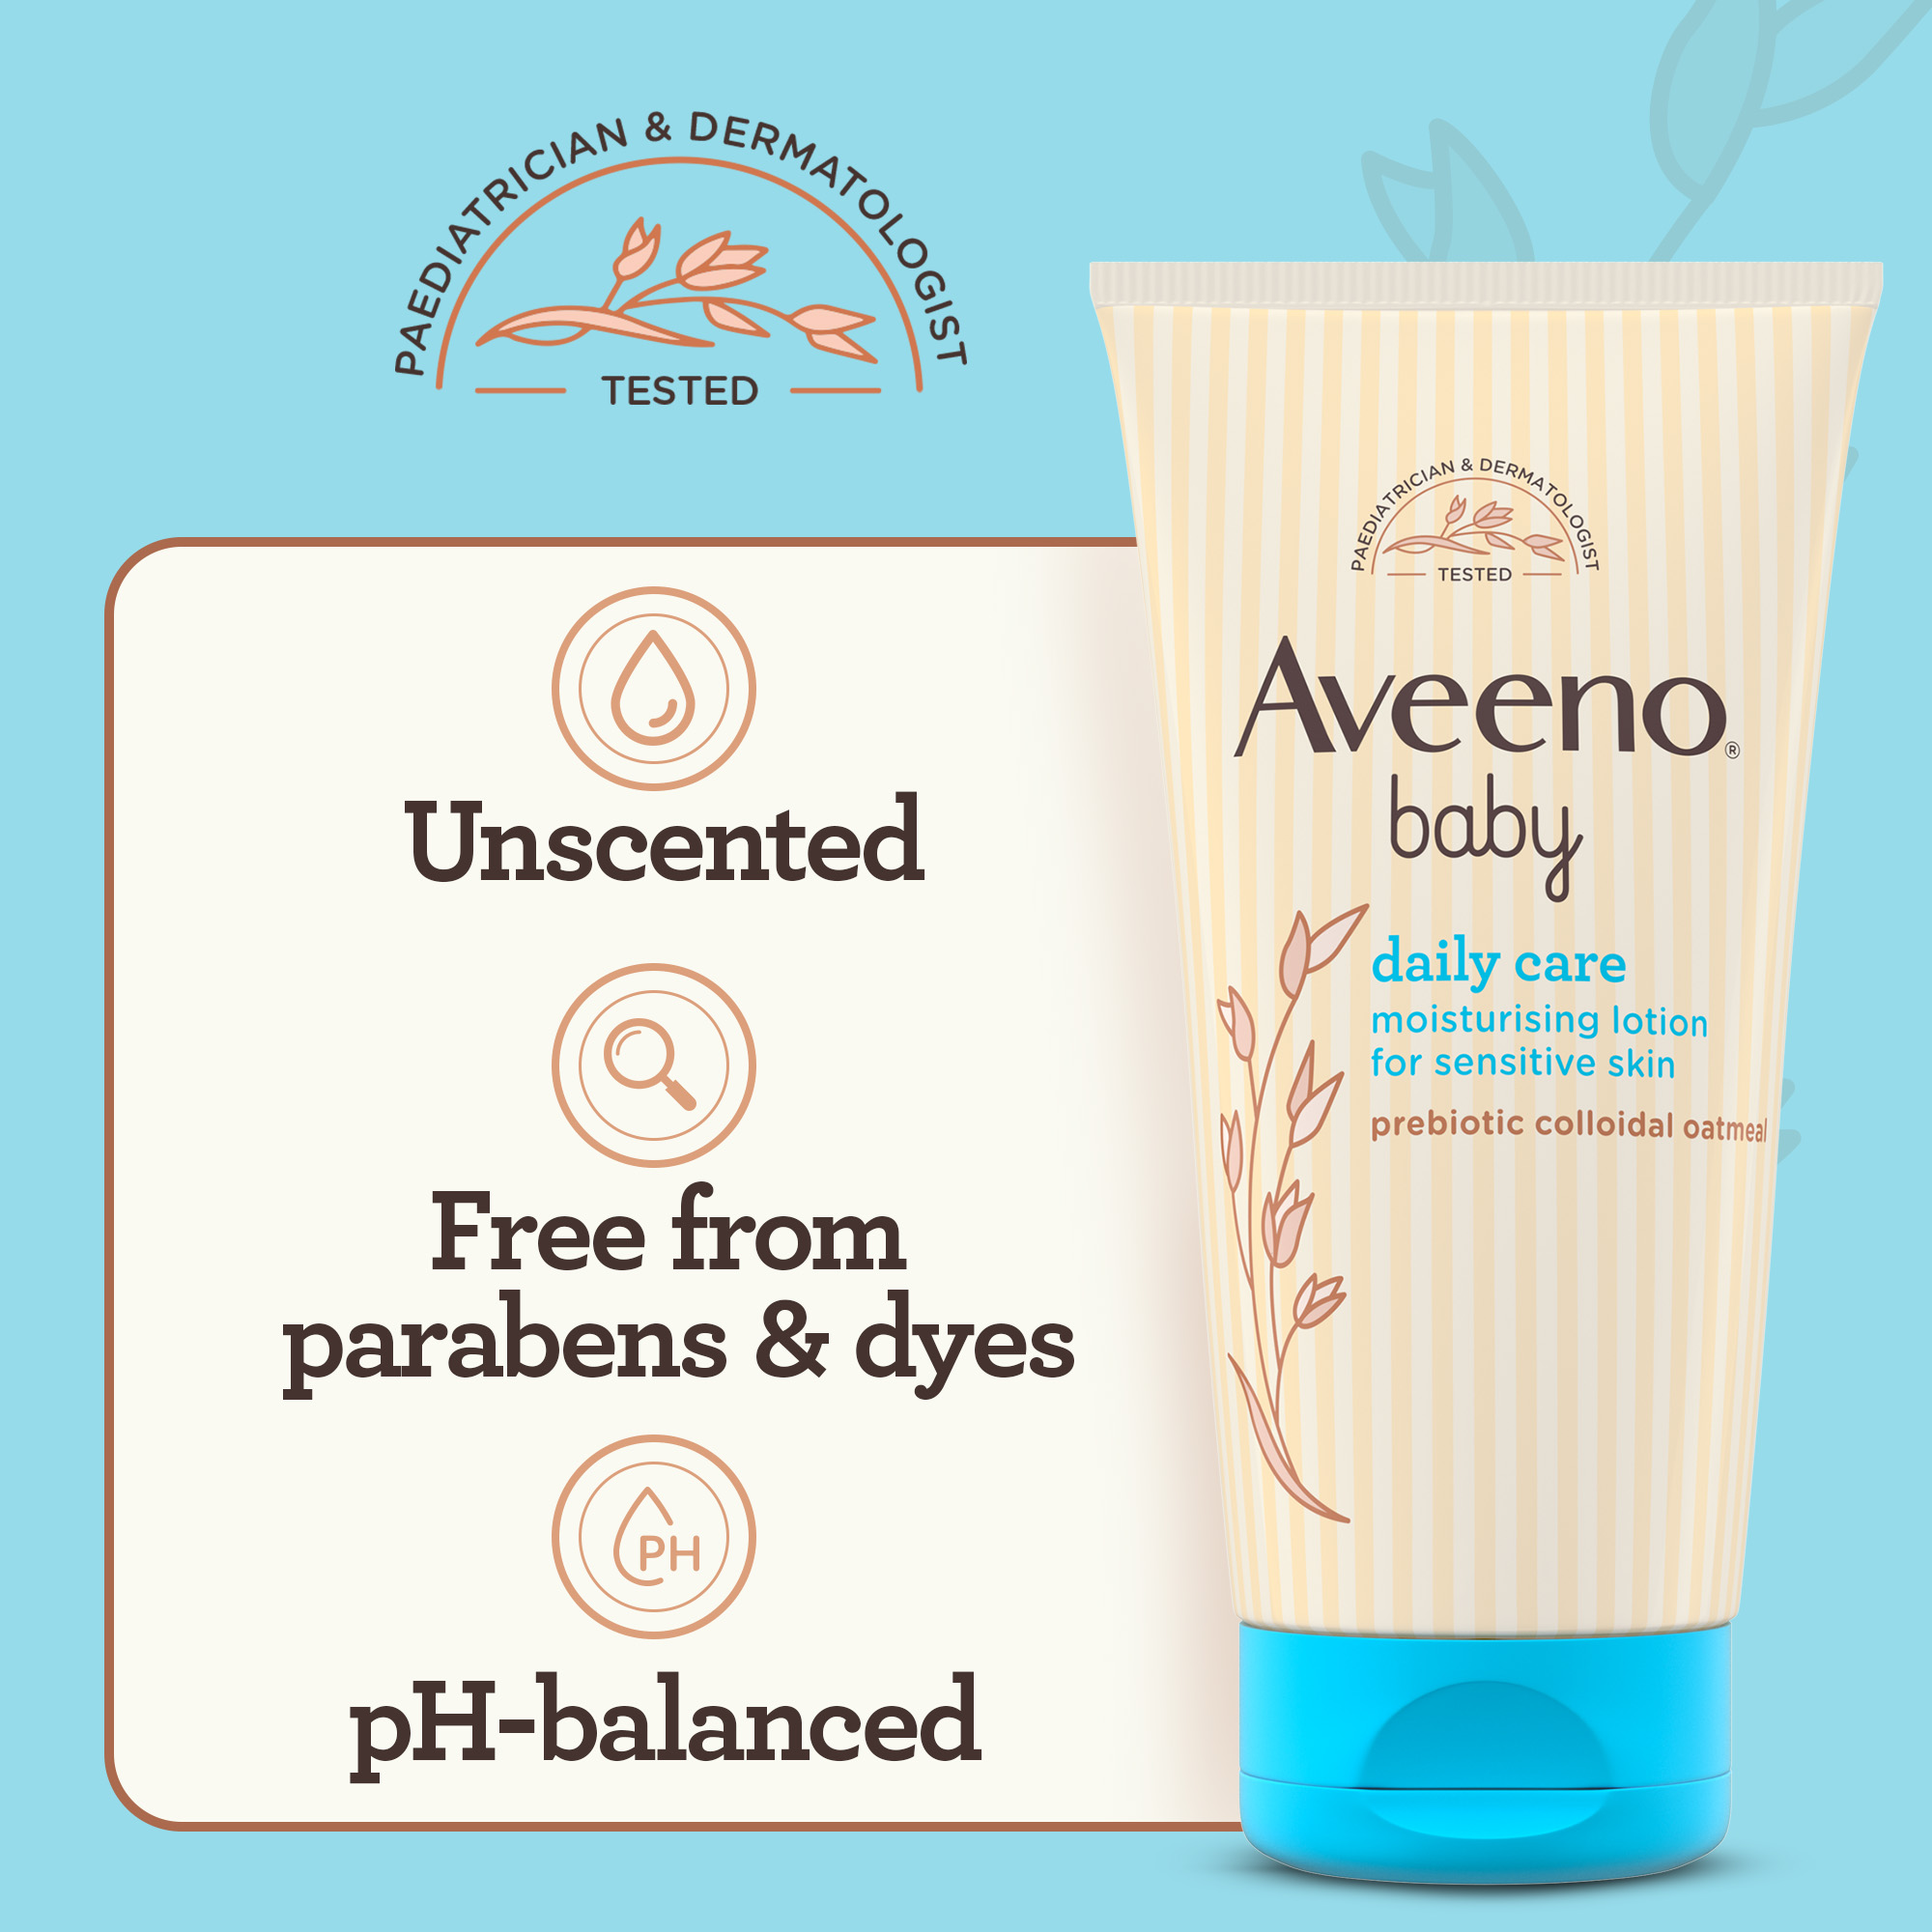 AVEENO® BABY DAILY CARE MOISTURISING LOTION IS UNSCENTED, FREE FROM PARABENS & DYES, AND PH-BALANCED